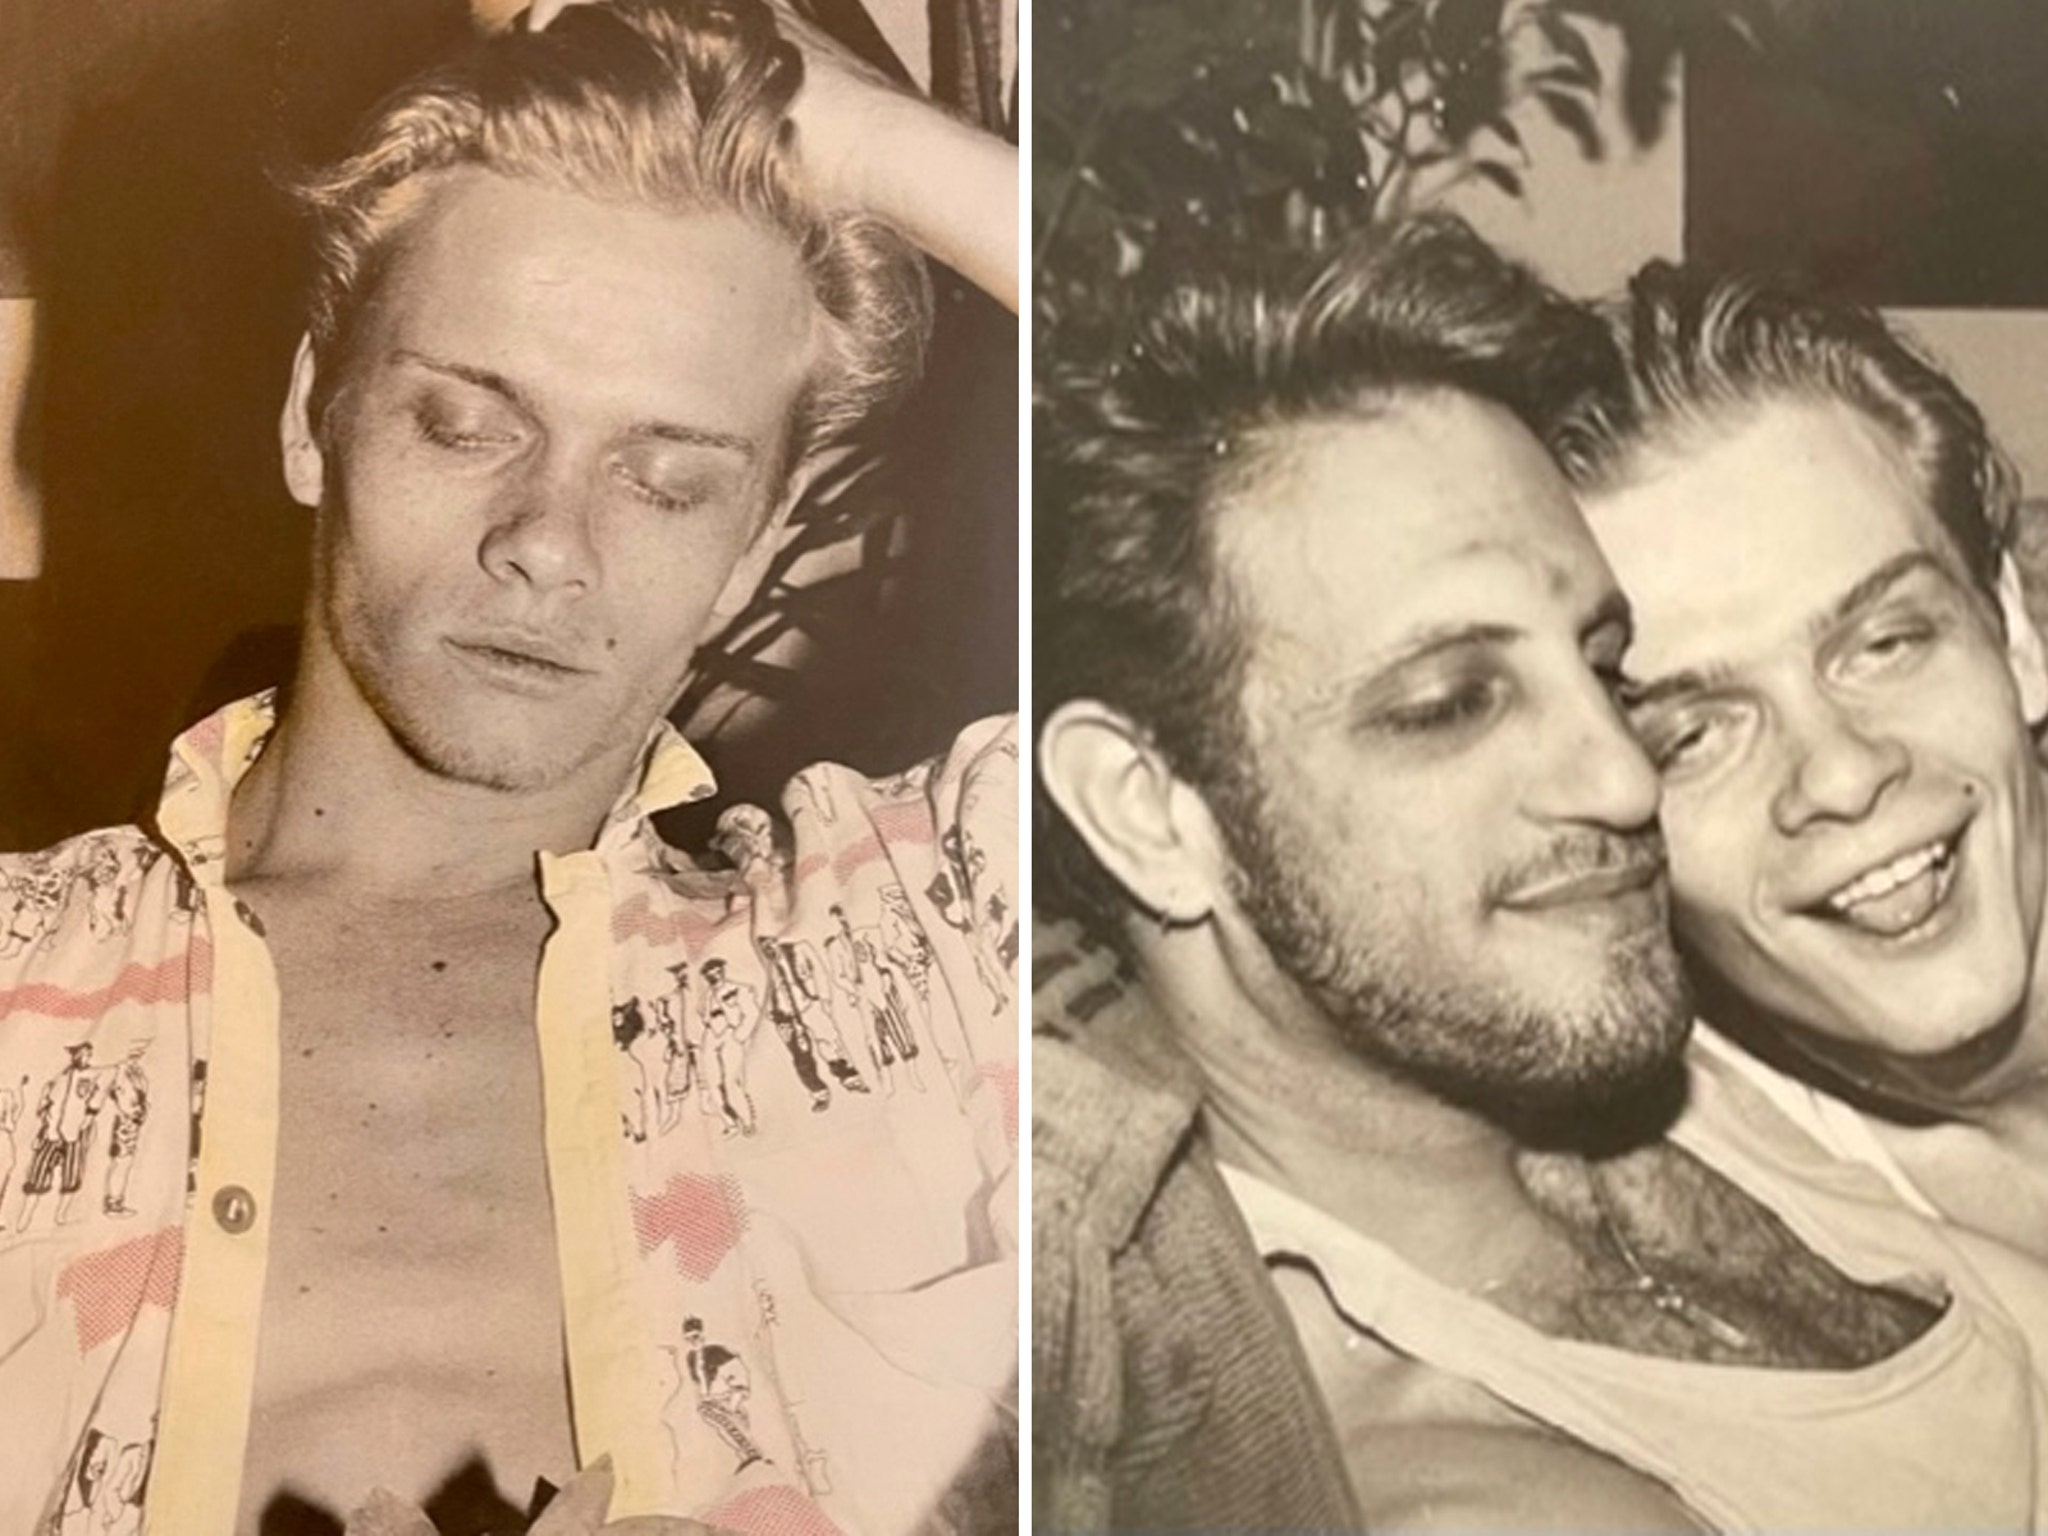 Gay Porn Star Billy Newtons Brutal Murder Solved Thanks to Amateur Sleuths 32 Years Later